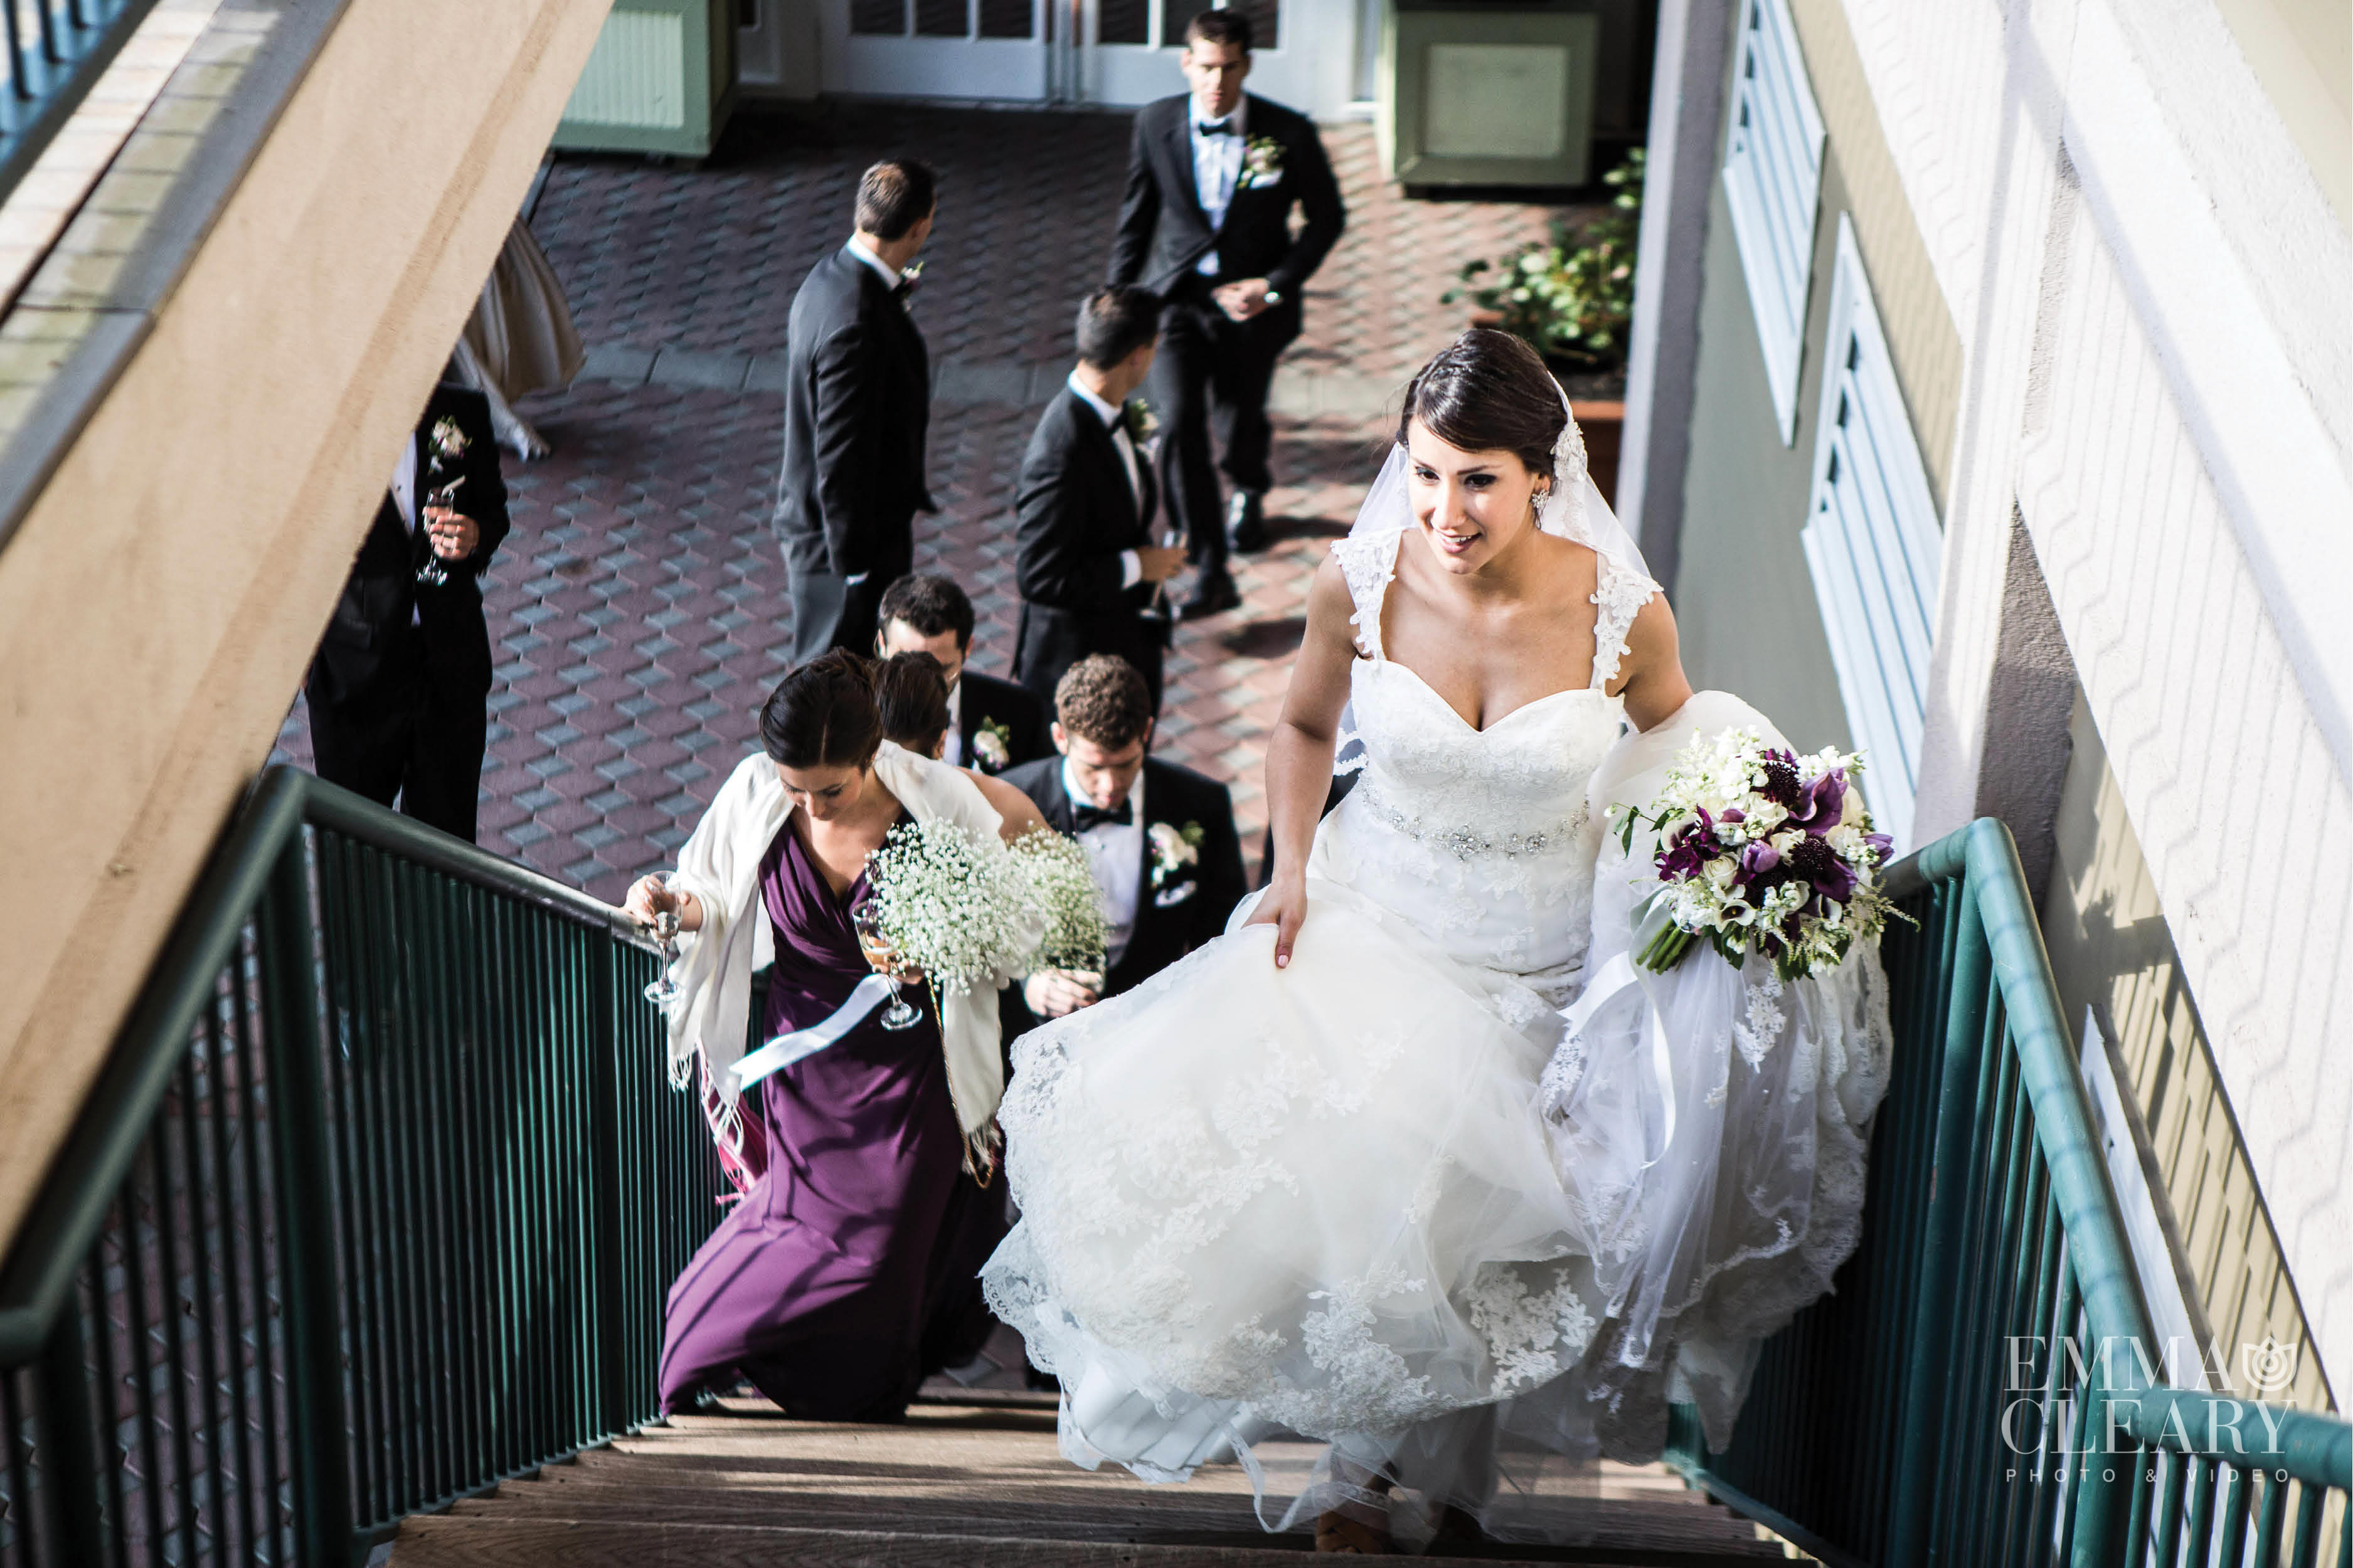 emma_cleary_photography-liberty-house-wedding8